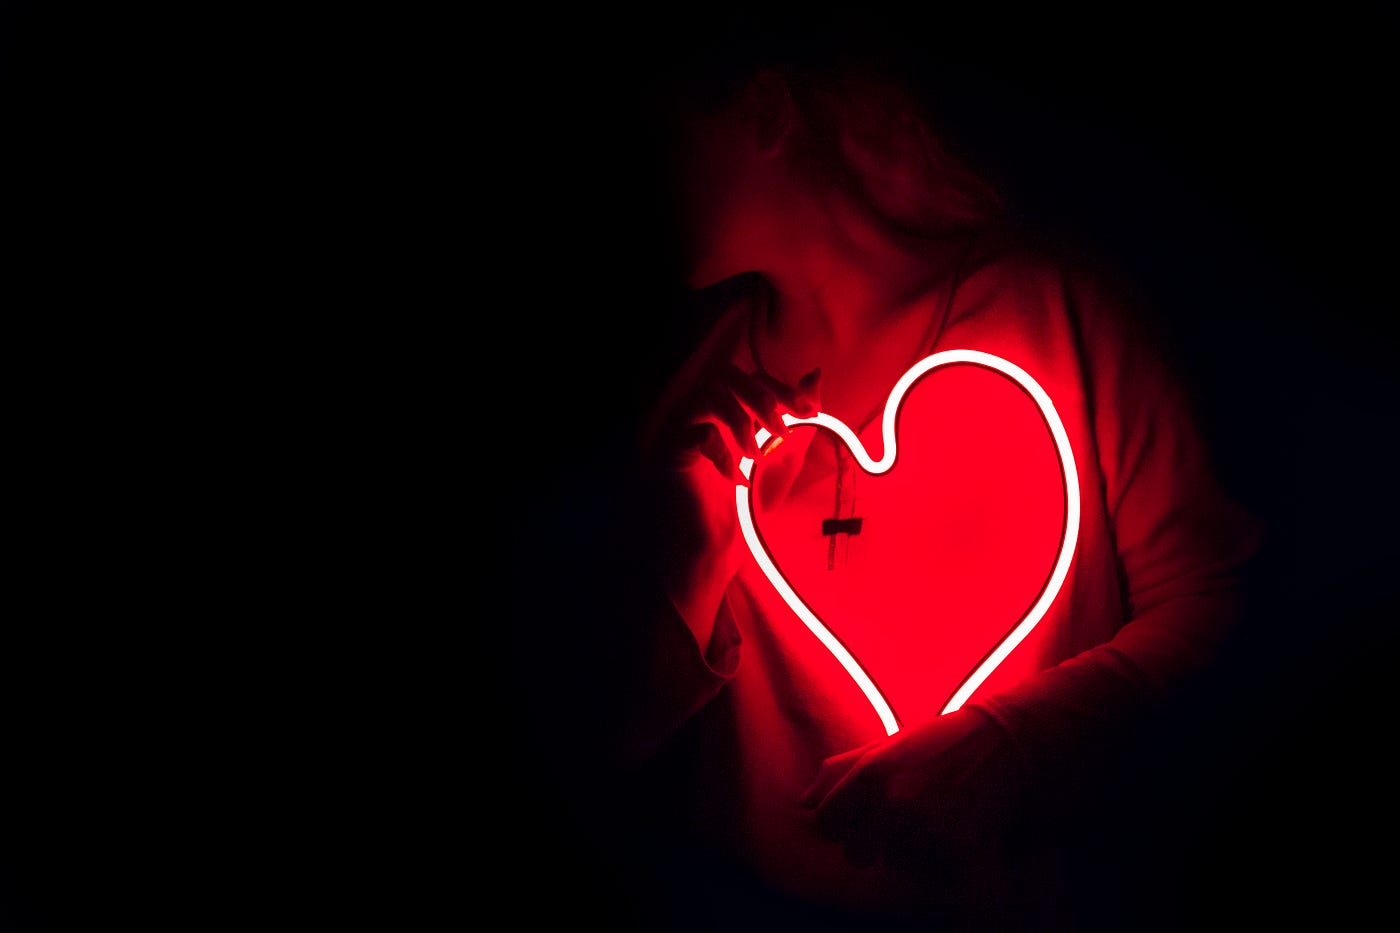 A woman clutchs a heart-shaped LED wire. The image is otherwise dark. The heart shapes our perceived duration of events, so time passes quicker when the heart contracts but slower when the heart relaxes.